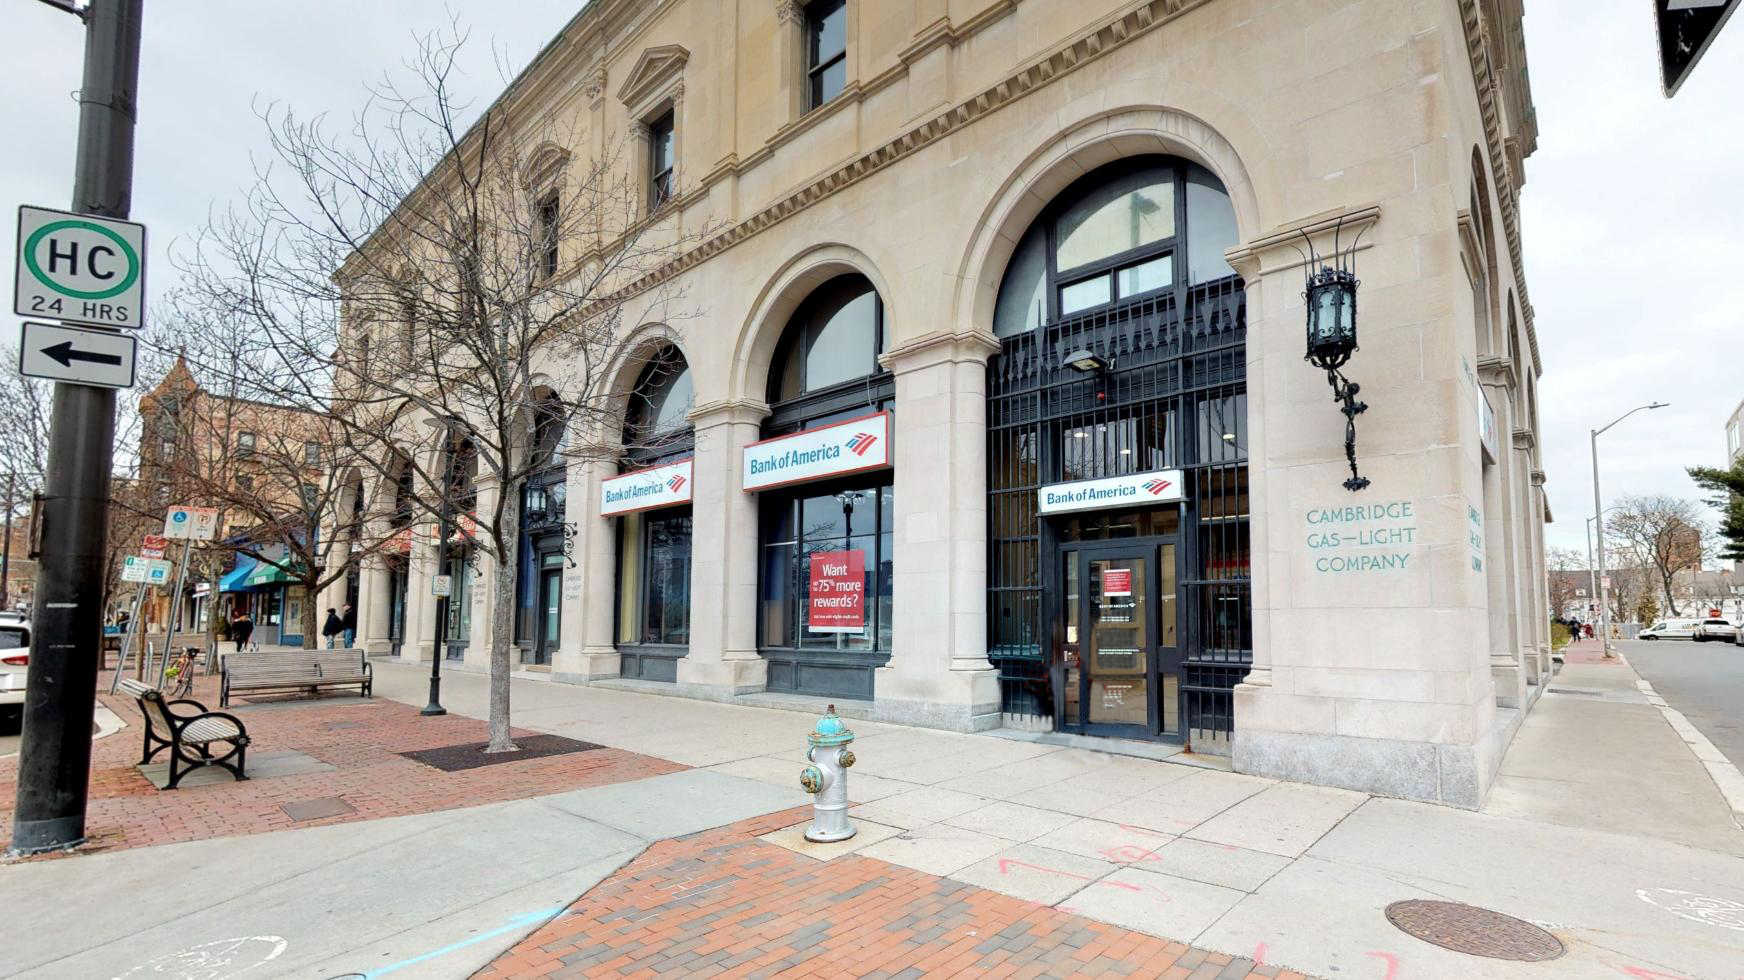 Bank of America financial center with walk-up ATM | 727 Massachusetts Ave, Cambridge, MA 02139